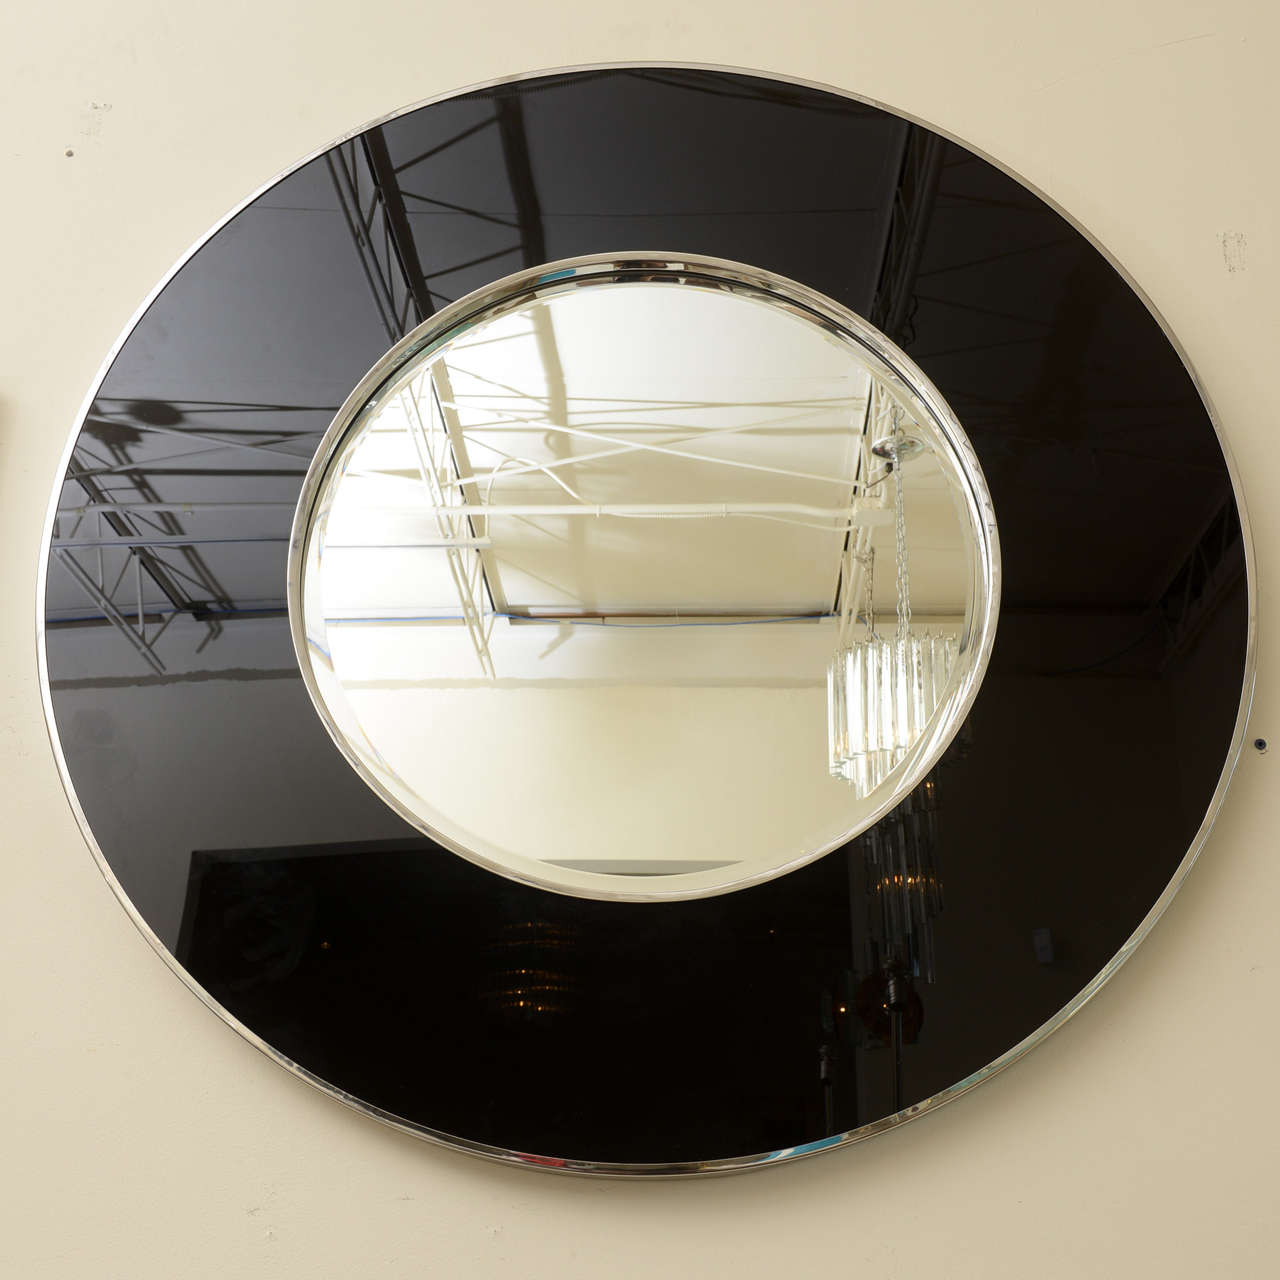 This chic, timeless, modern and arresting black glass and stainless steel mirror makes an entrance to a room. The stainless steel has the inner band and the outer band surrounded by the black glass and the mirror in the center.
Very well made from